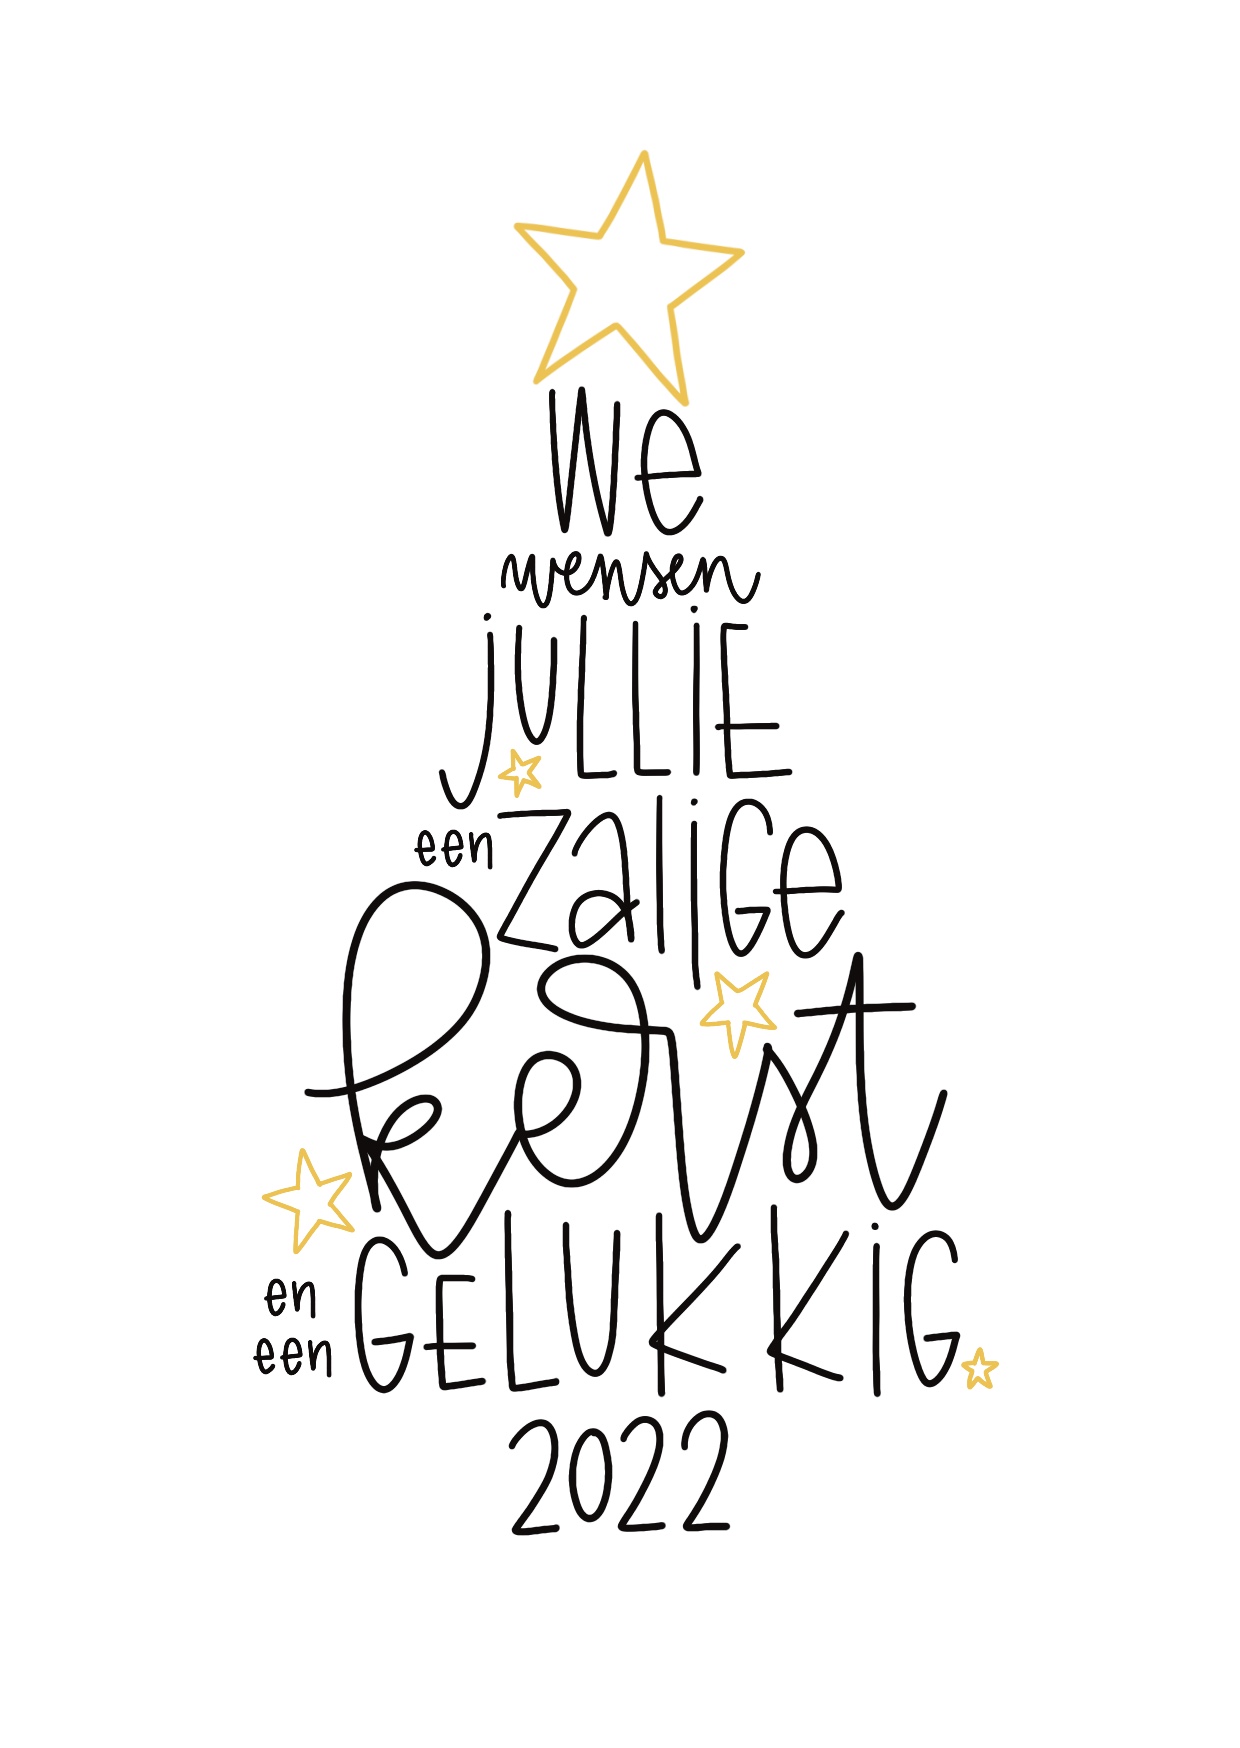 Wens Kerstboom 2022 - By Birthe